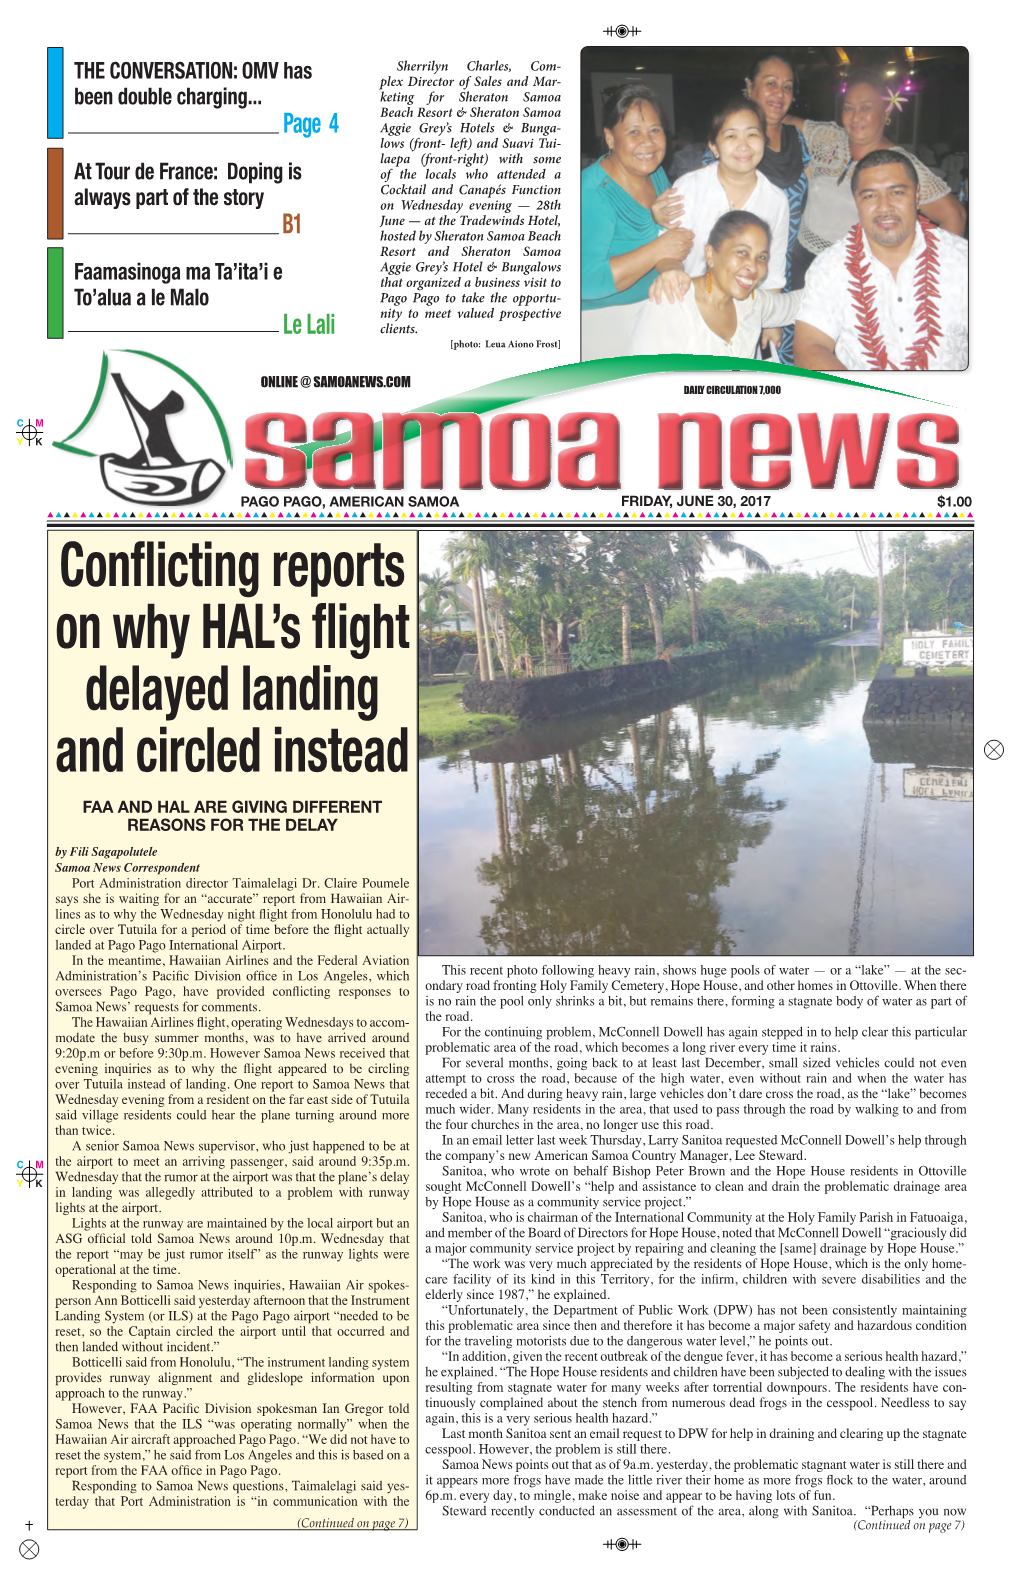 Conflicting Reports on Why HAL's Flight Delayed Landing and Circled Instead